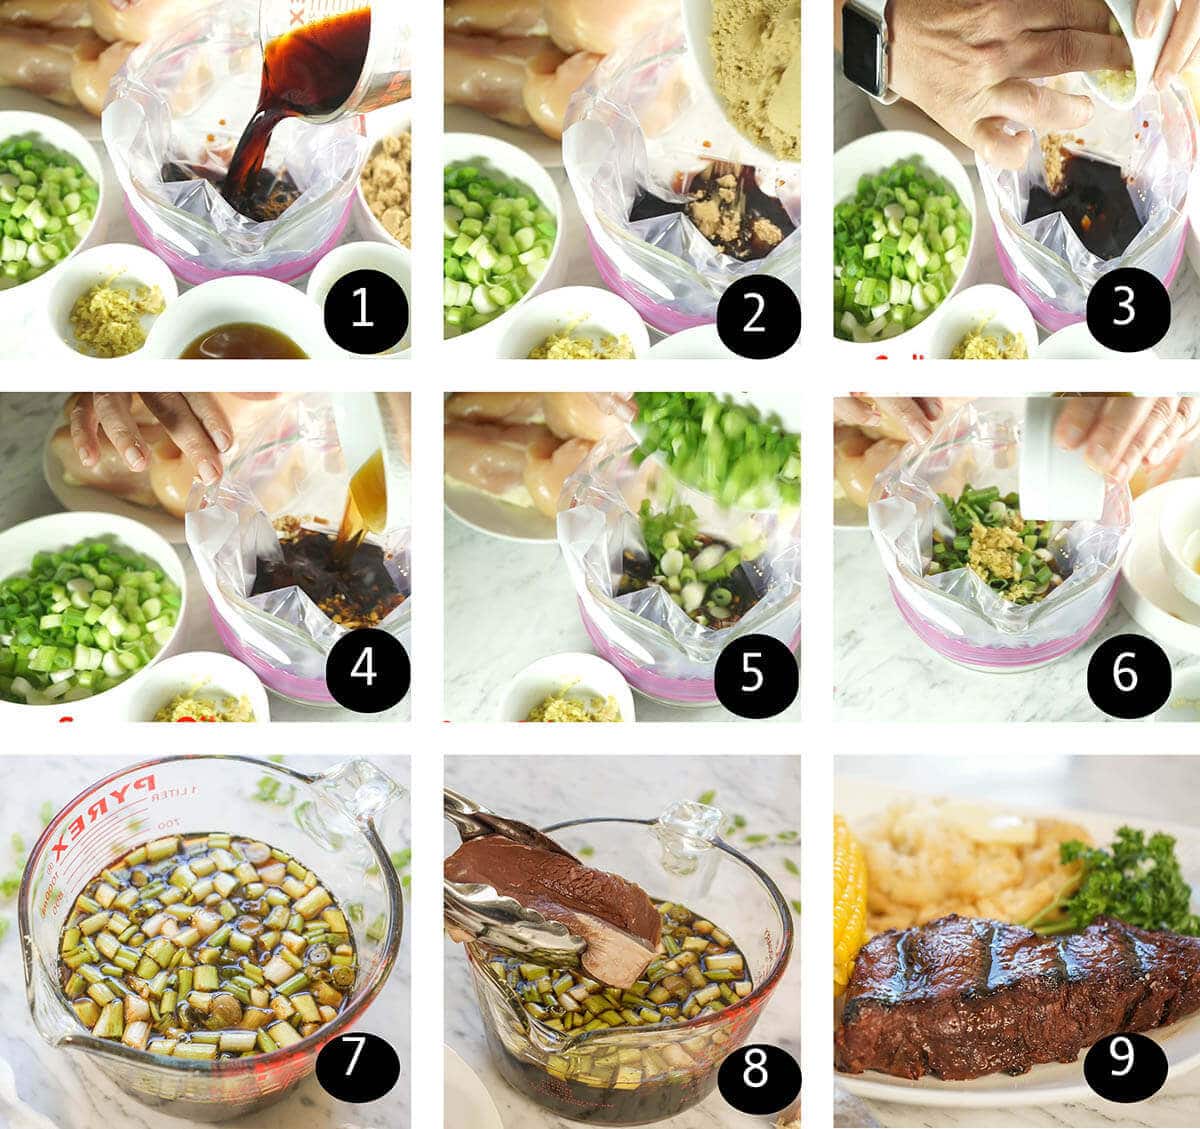 Step by step instructions to prepare the sauce.